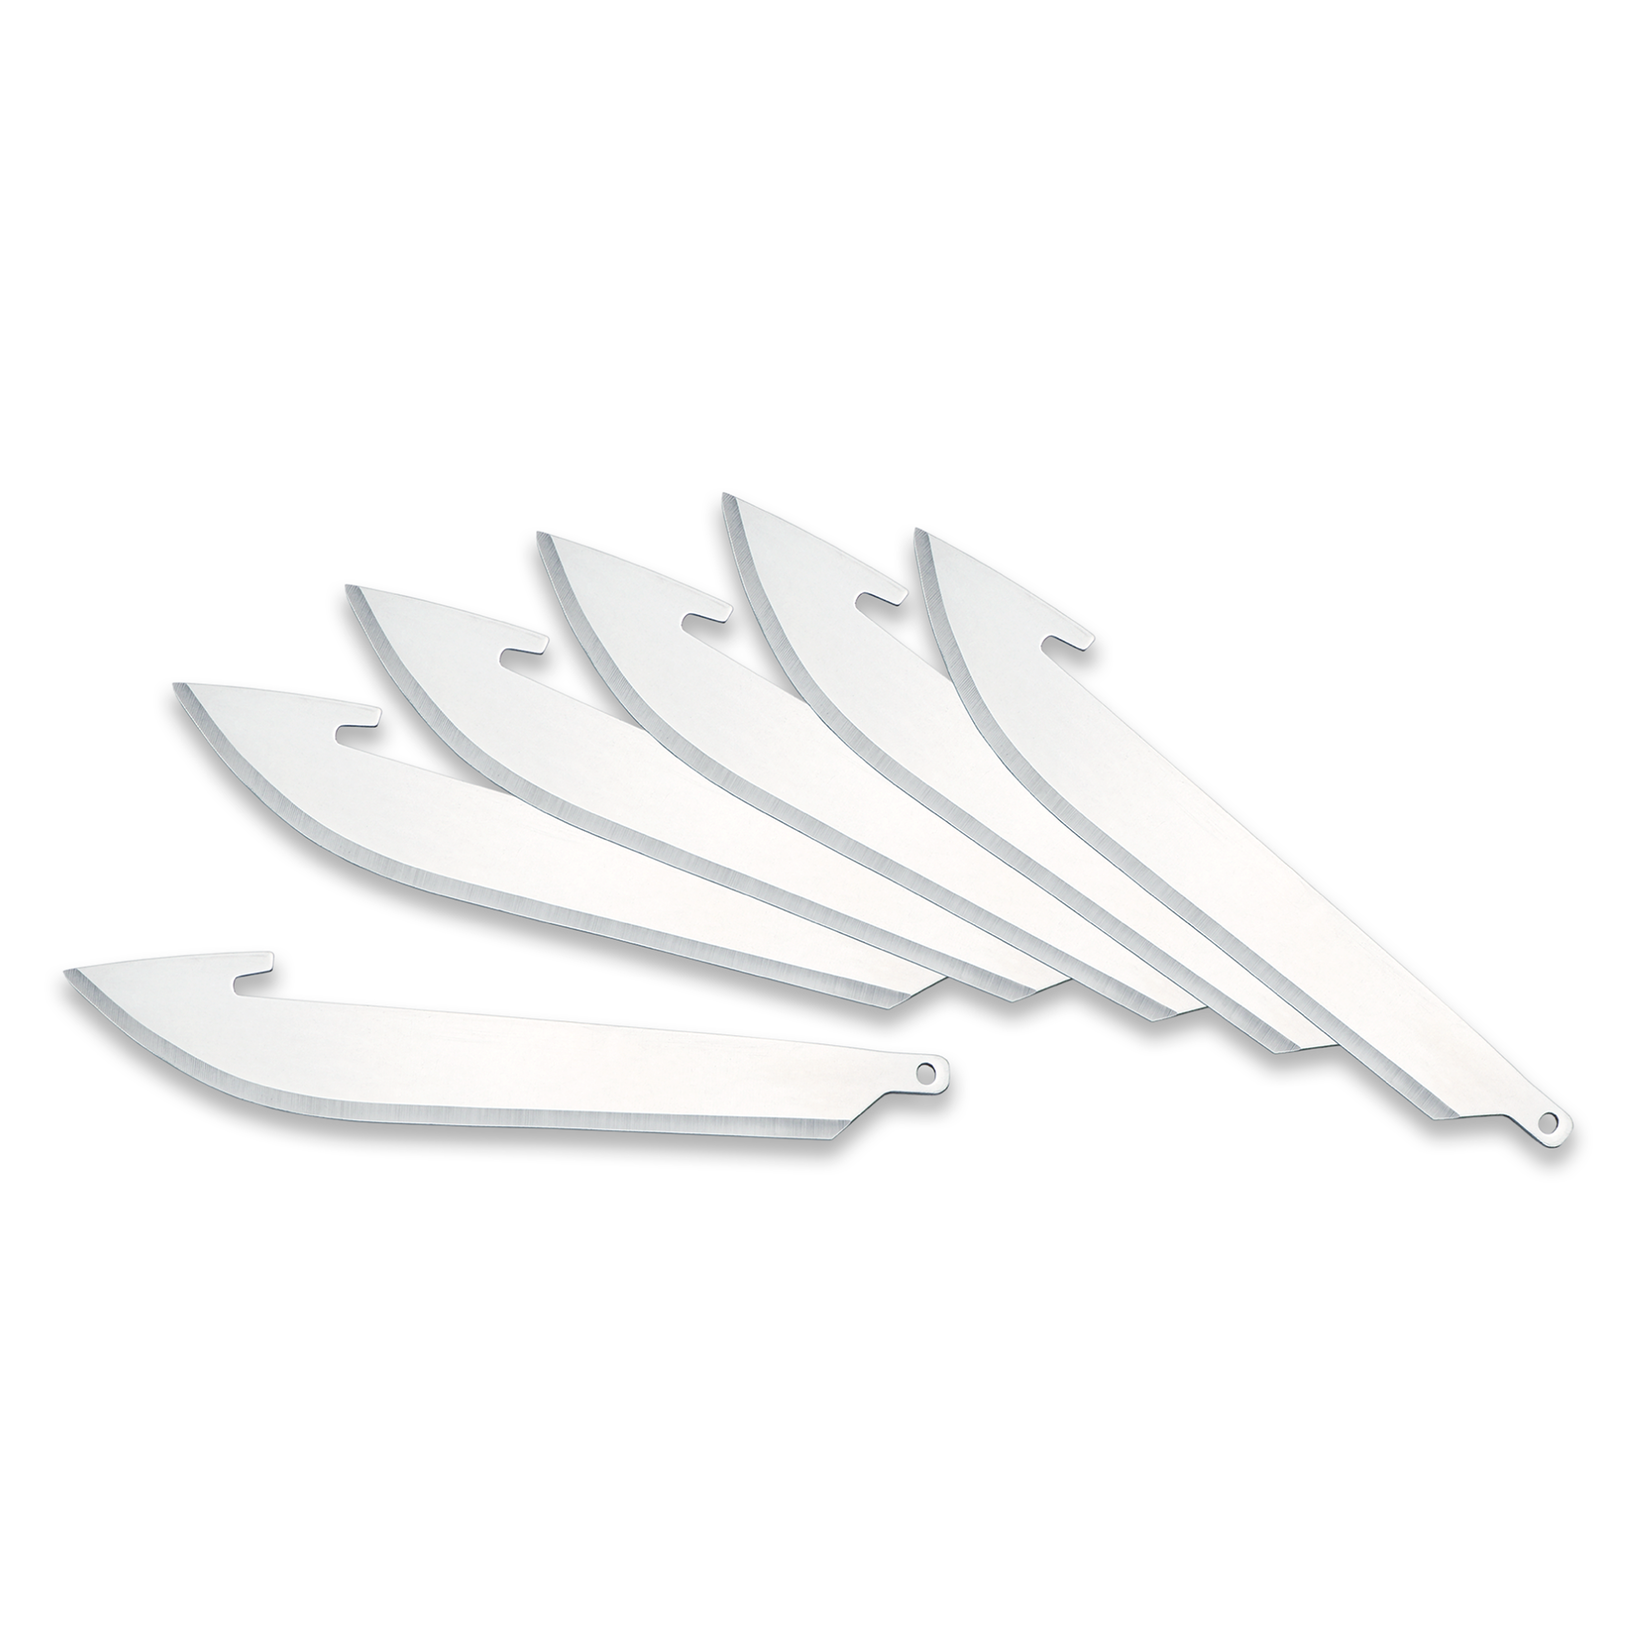 Outdoor Edge 3.5” DROP-POINT BLADE PACK (6 Pieces) - Blister